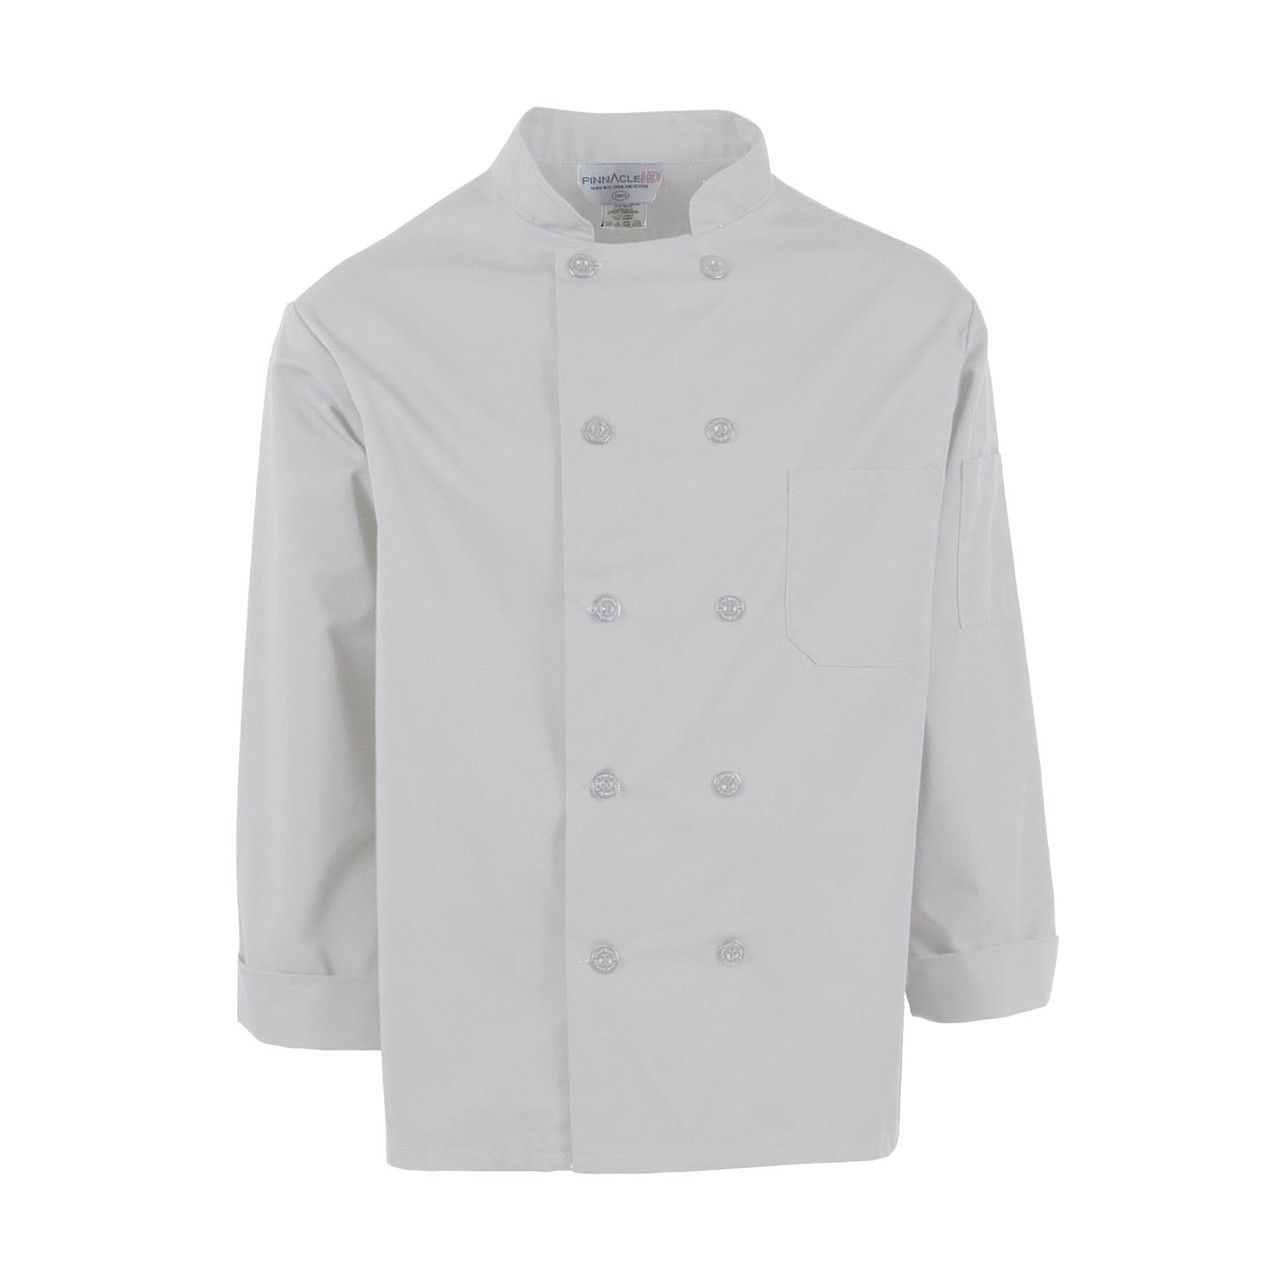 Does the white chef coat have any special button features?